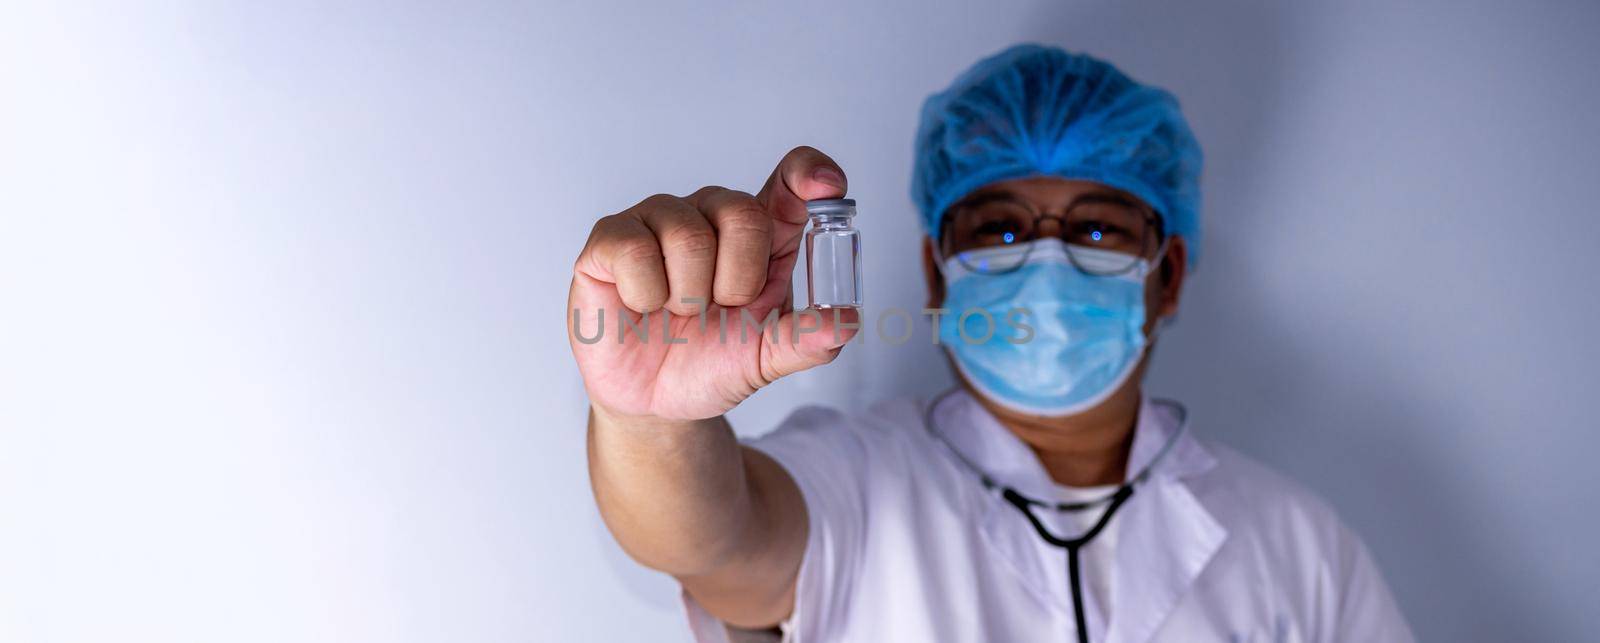 Portrait of a doctor wearing a mask and wearing a hat Stand holding an empty vaccine or pill bottle.Medical concept and treatment. by Unimages2527